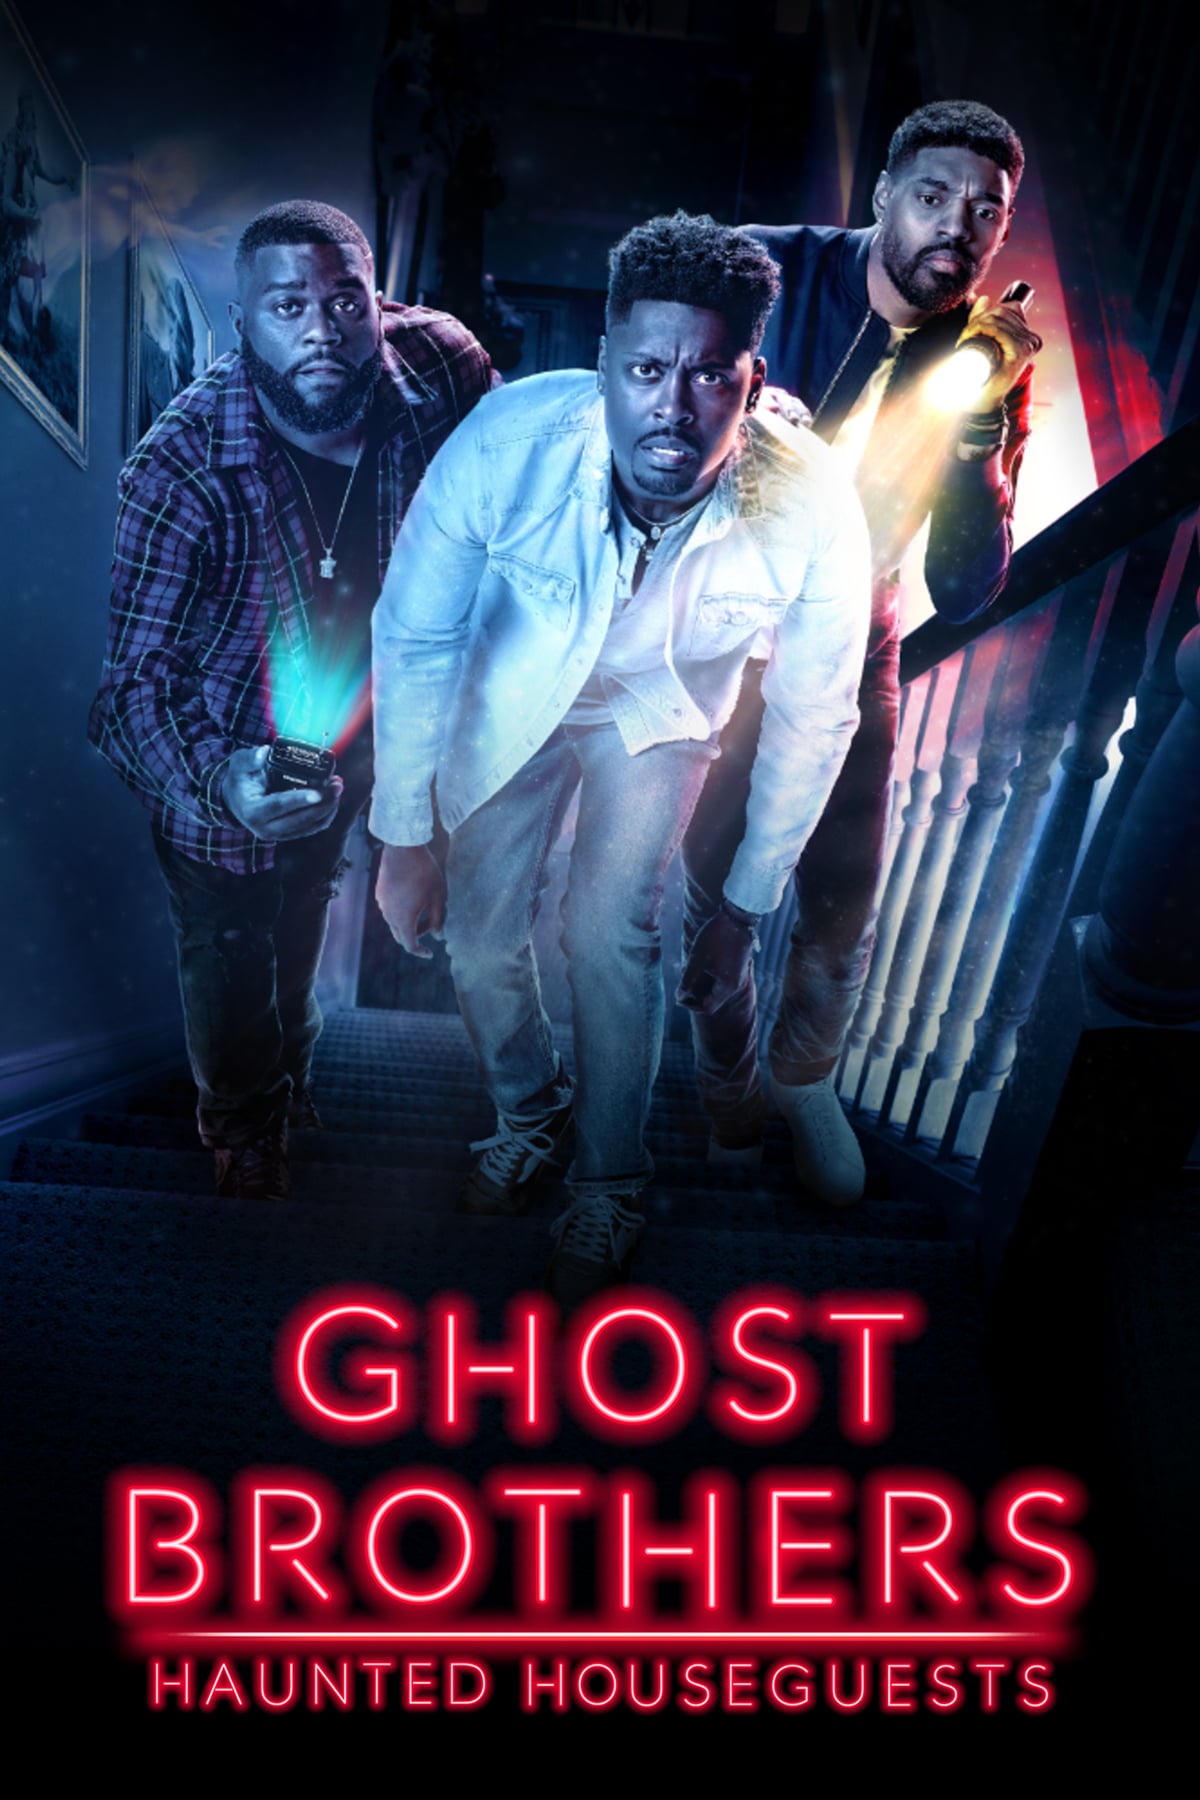 Ghost Brothers Haunted Houseguests trailer, release date, cast, where